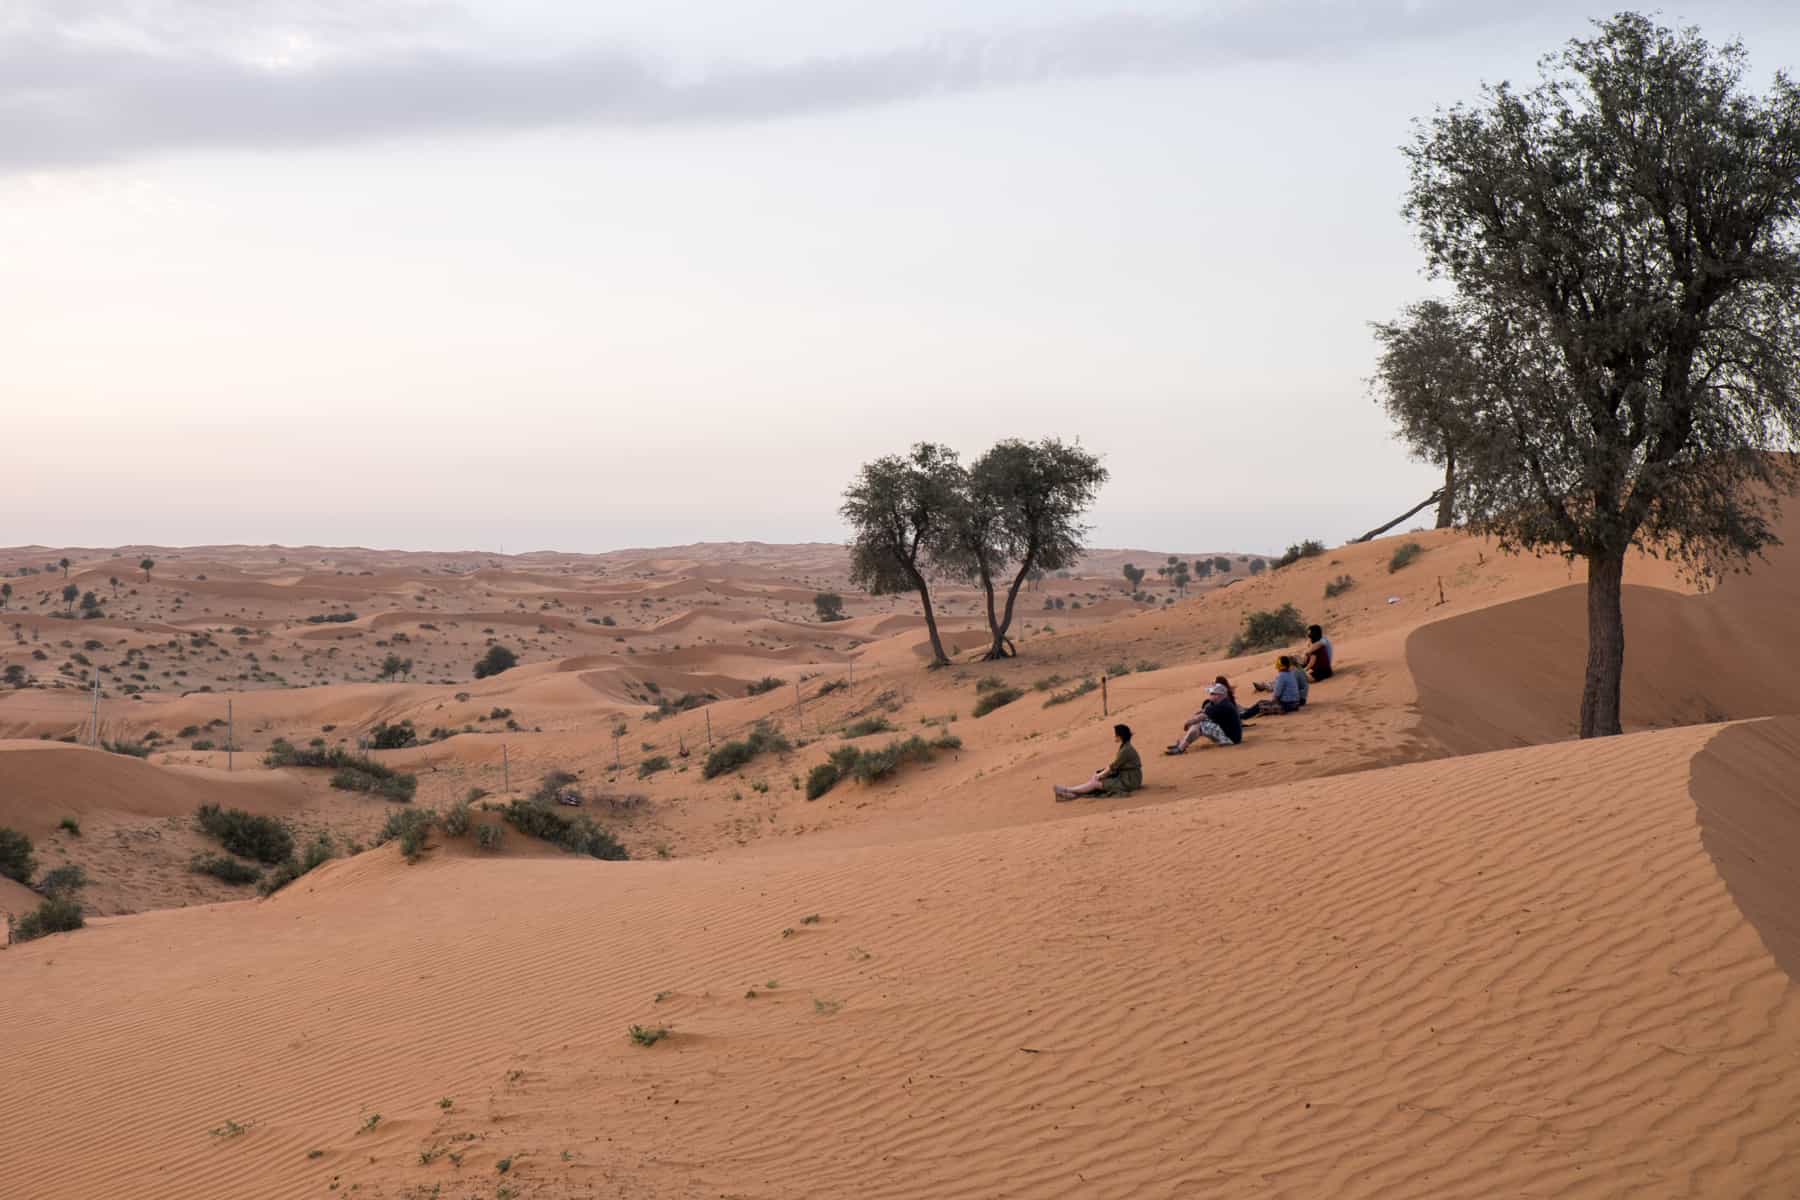 Seven people sit on a golden coloured sand dune, in between green desert trees, overlooking the rolling sands that stretch to the horizon